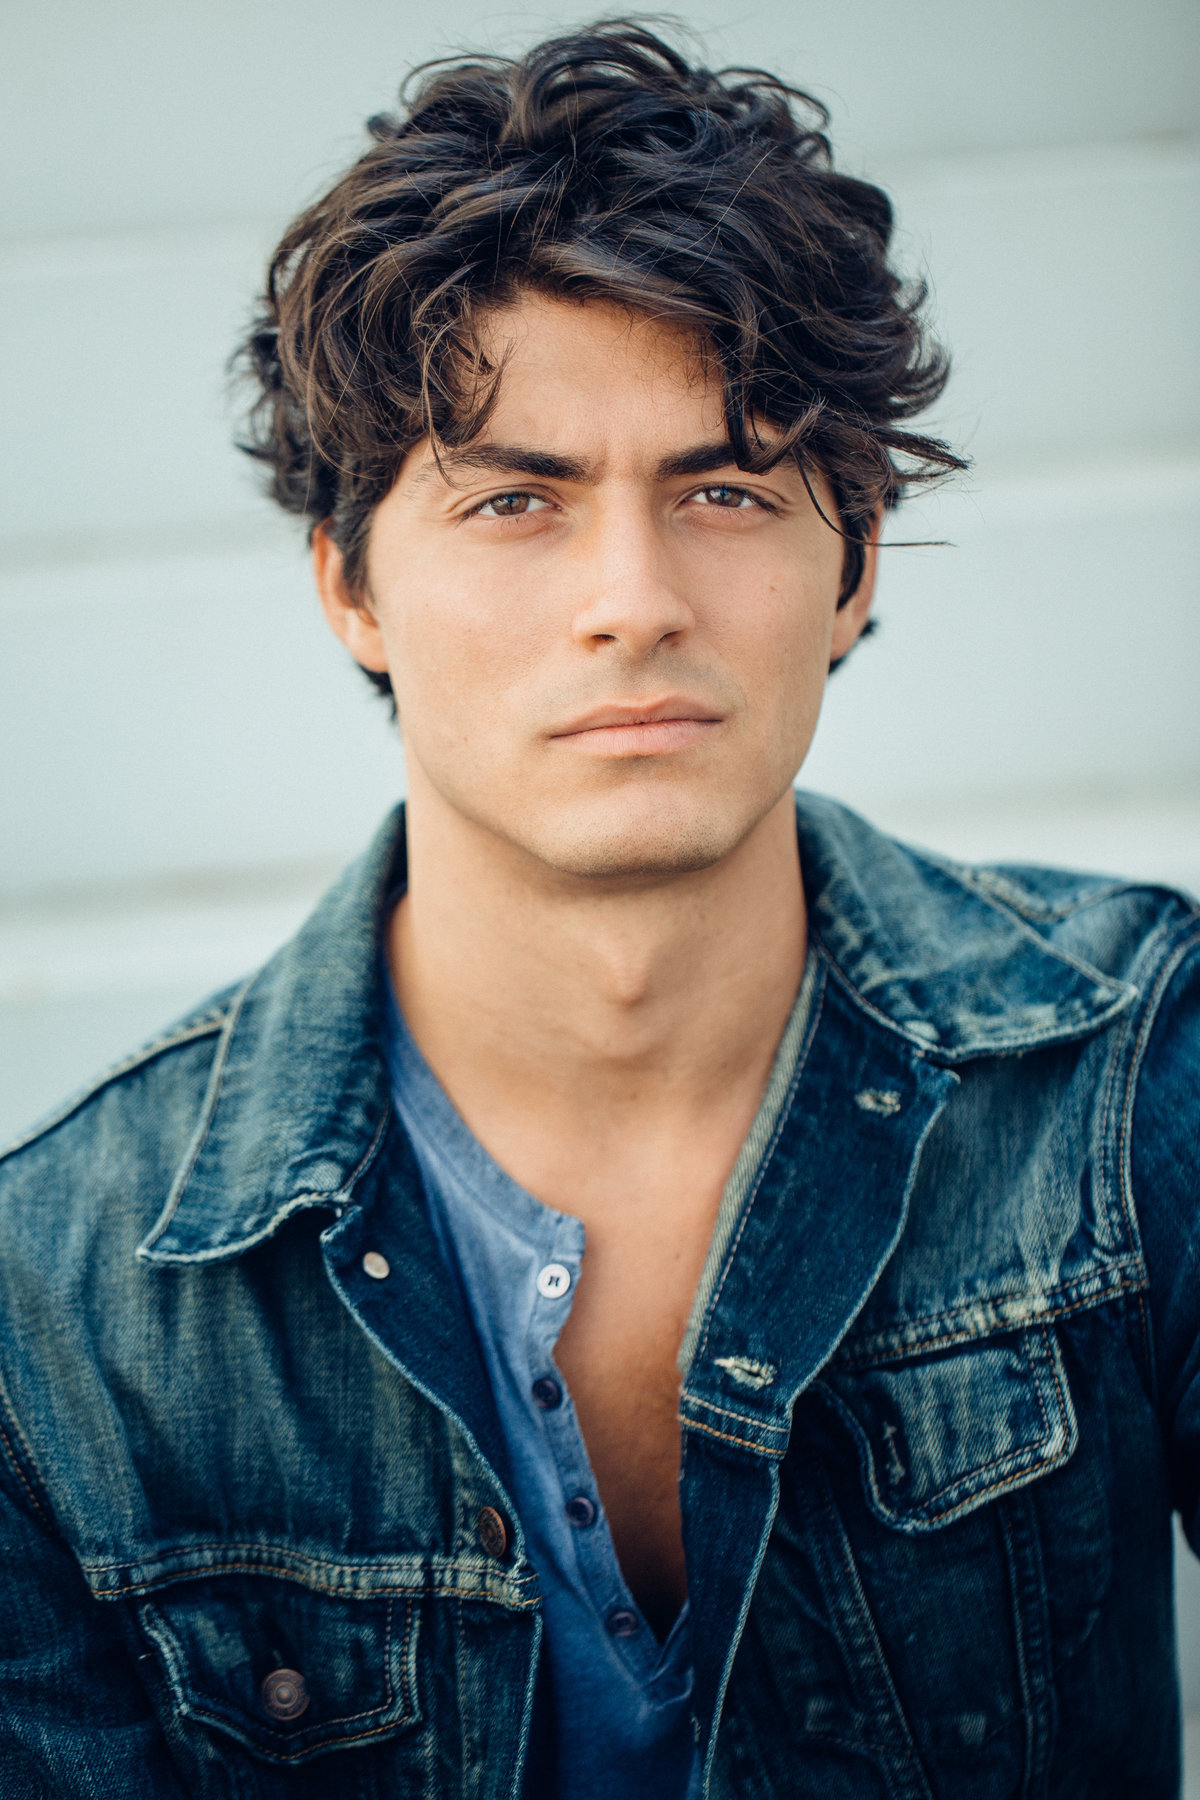 Headshot Photograph Of Young Man In Blue Outer Denim Jacket And Blue Inner Buttoned Shirt Los Angeles